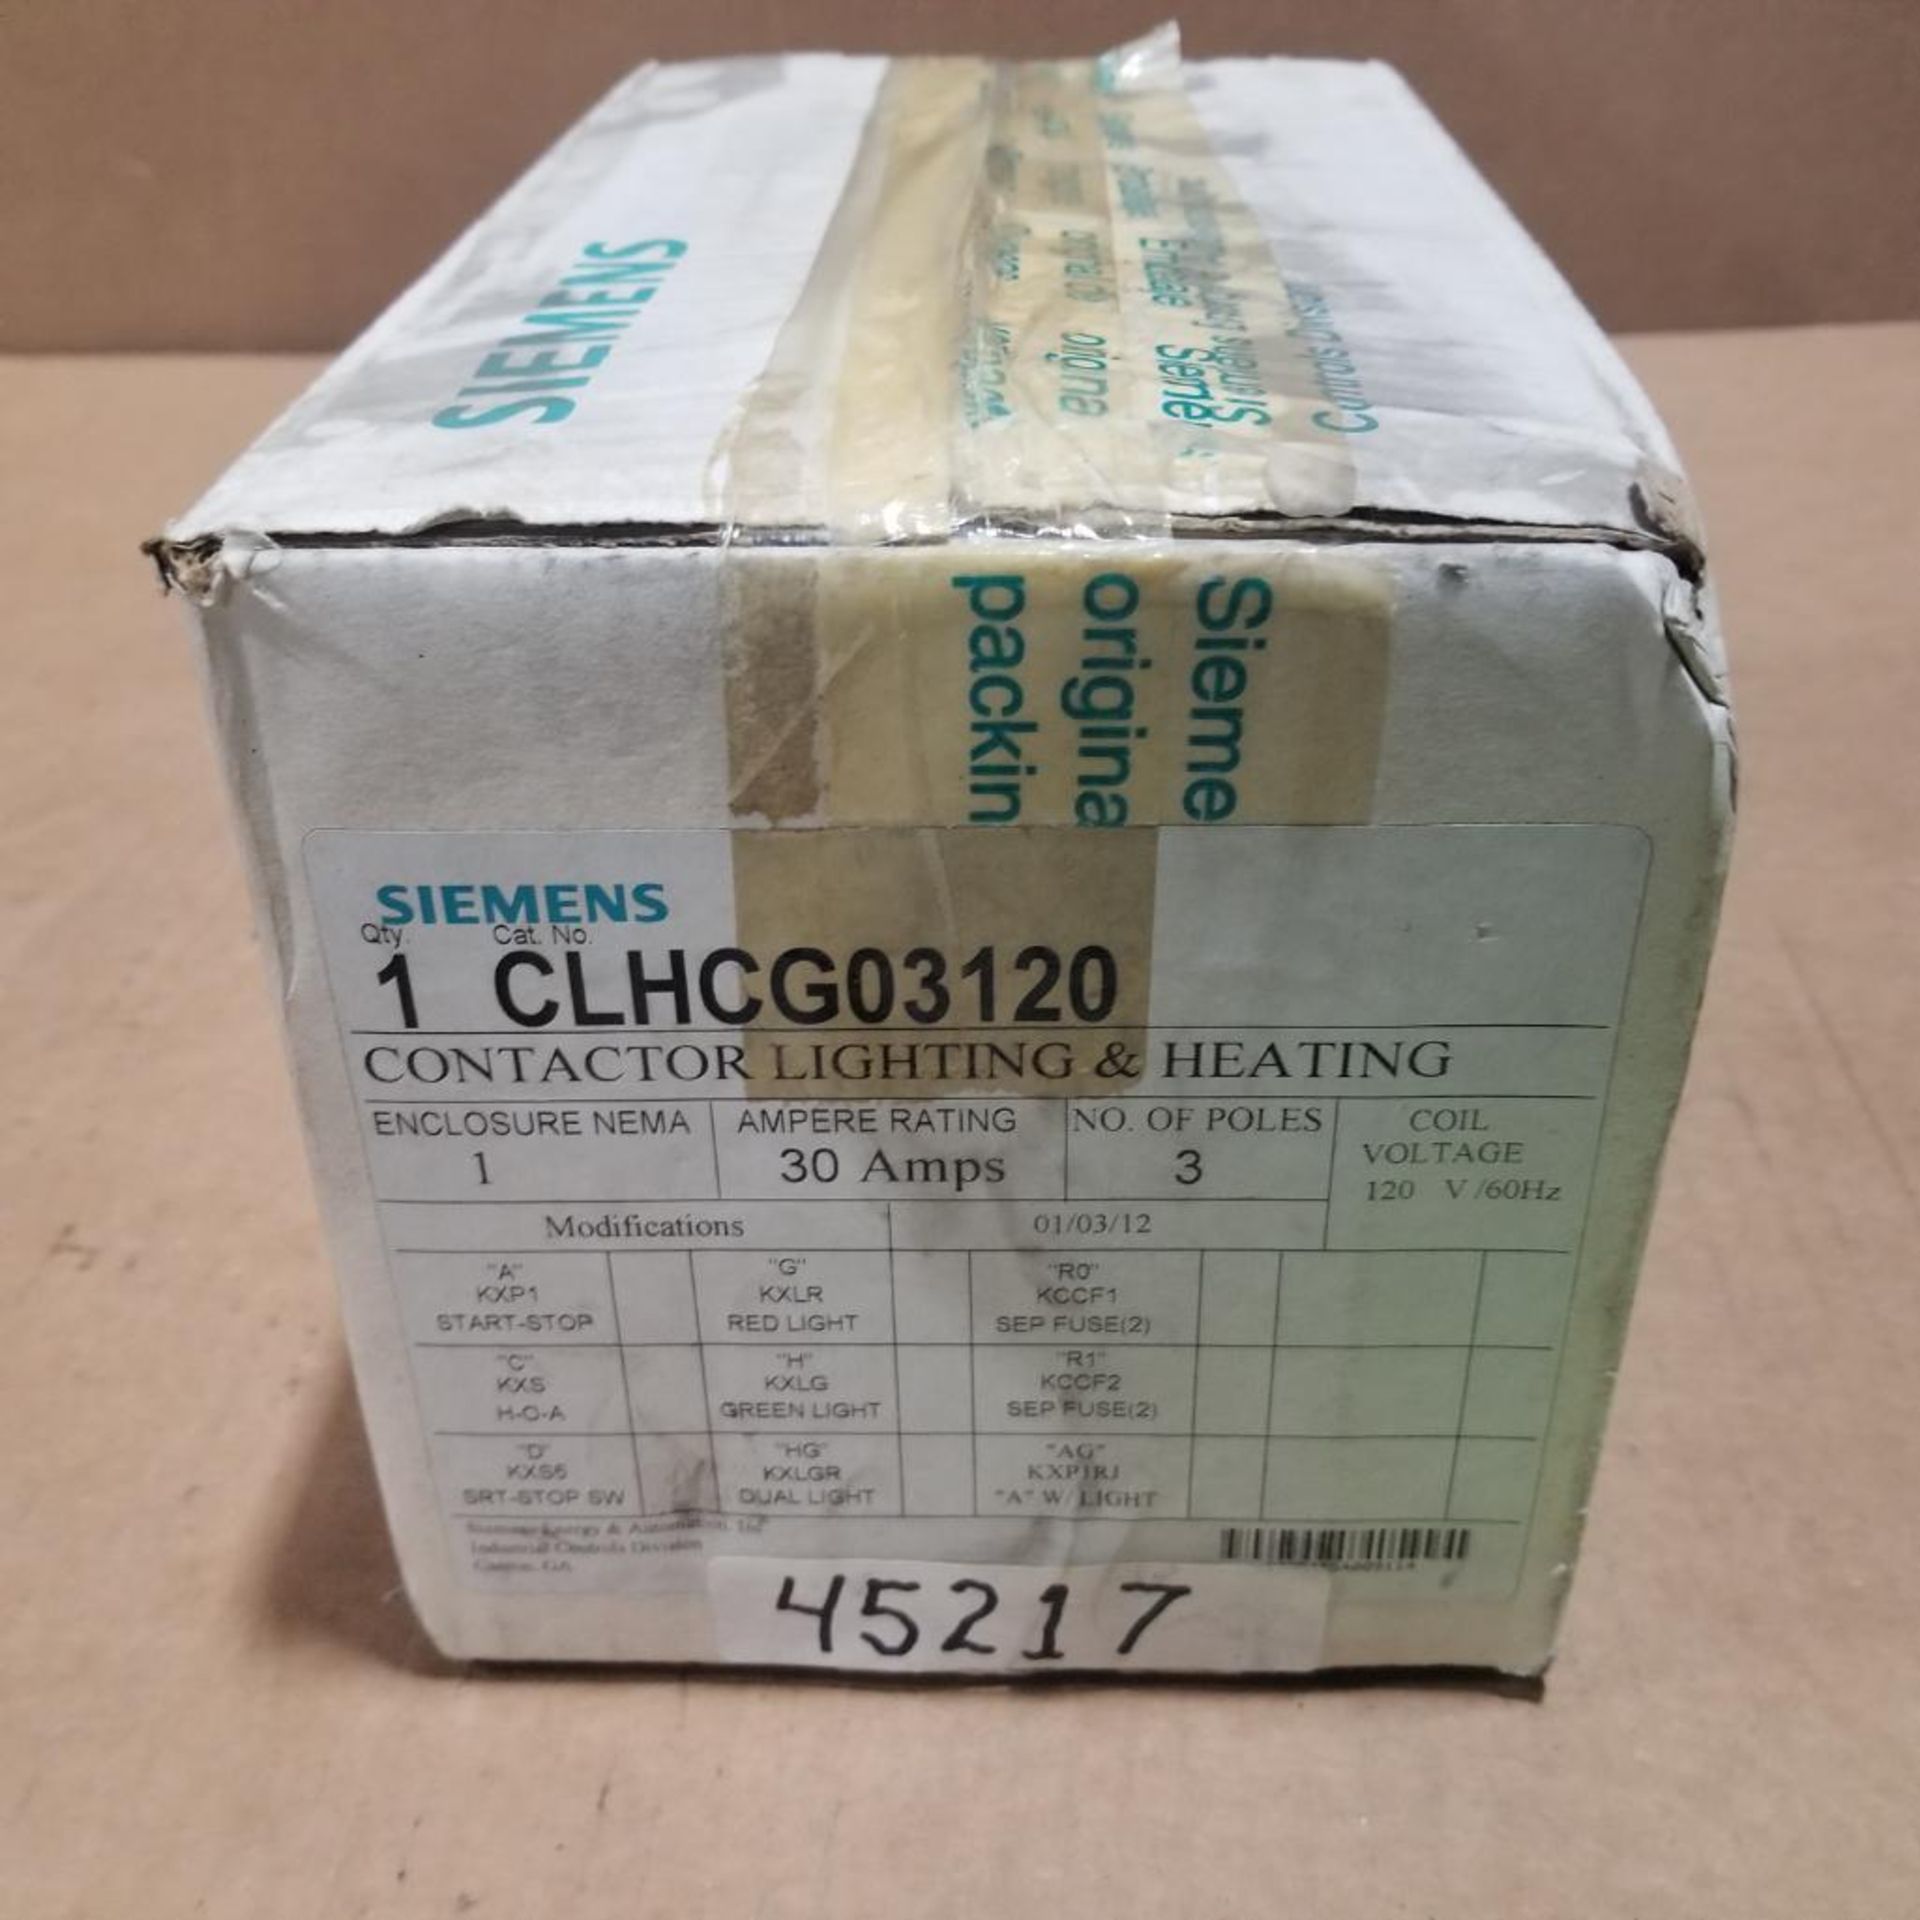 Siemens contactor lighting and heating. Part number CLHCG03120.